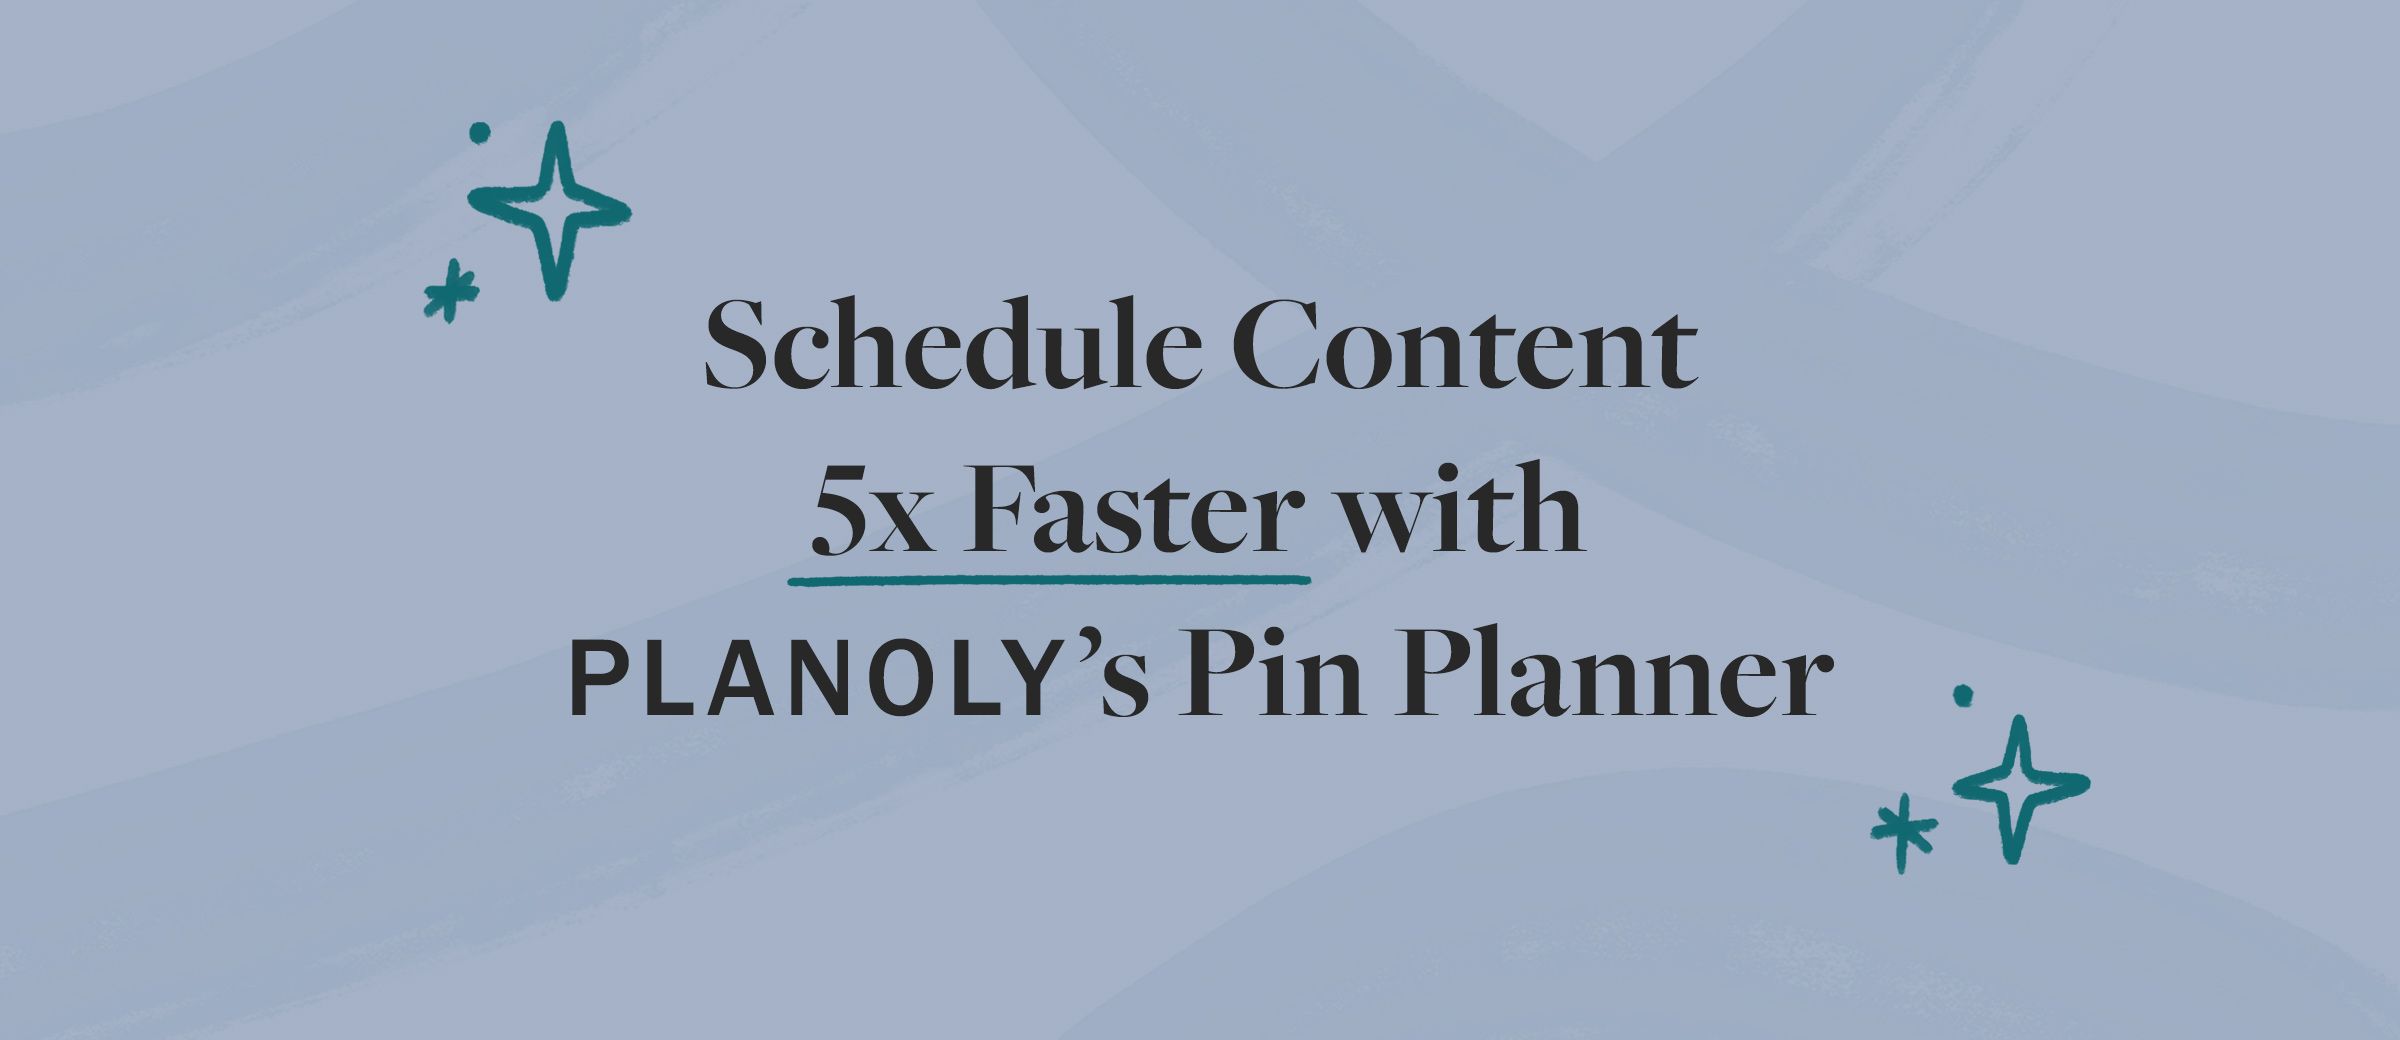 PLANOLY-Blog Post-Pin Planner Case Study-Banner